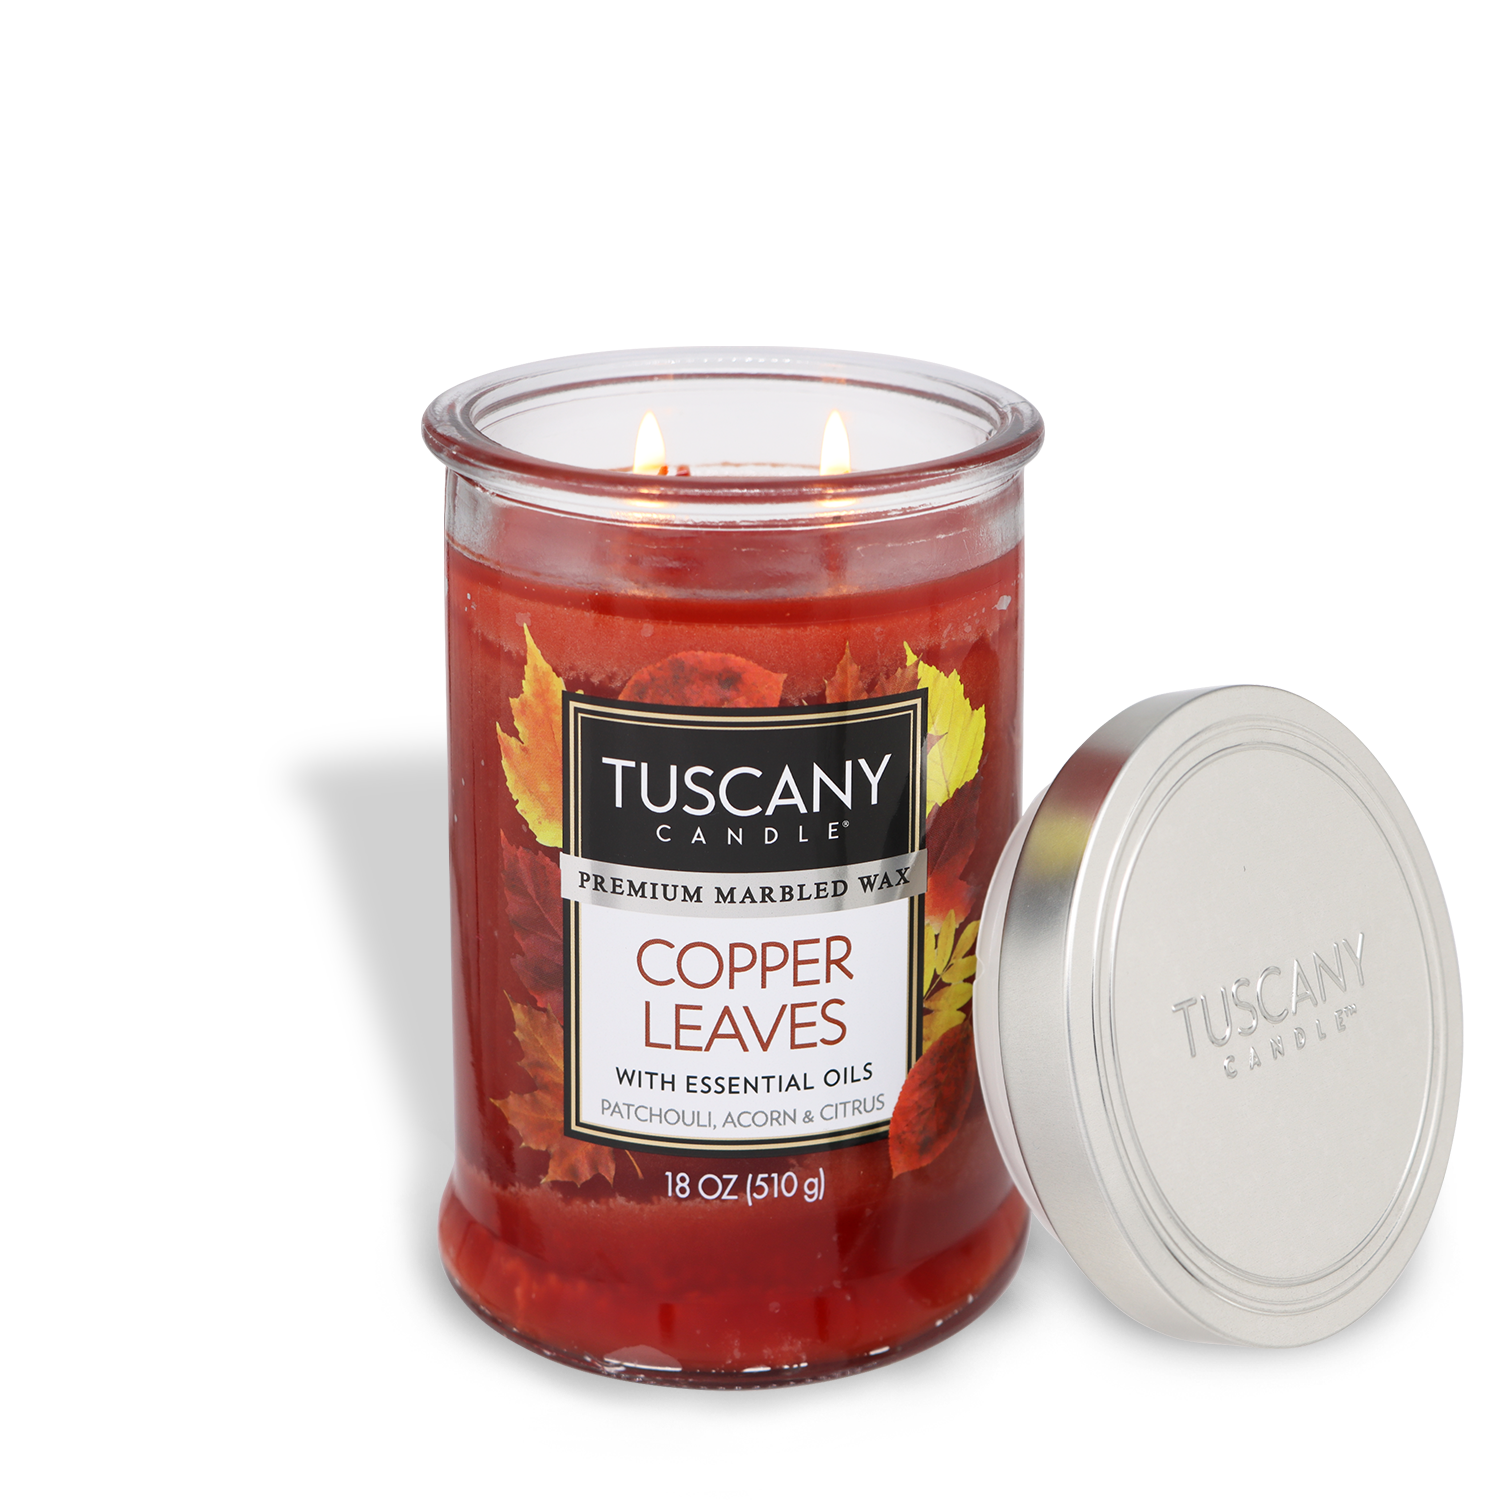 A Copper Leaves Long-Lasting Scented Jar Candle with a lid by Tuscany Candle® EVD.